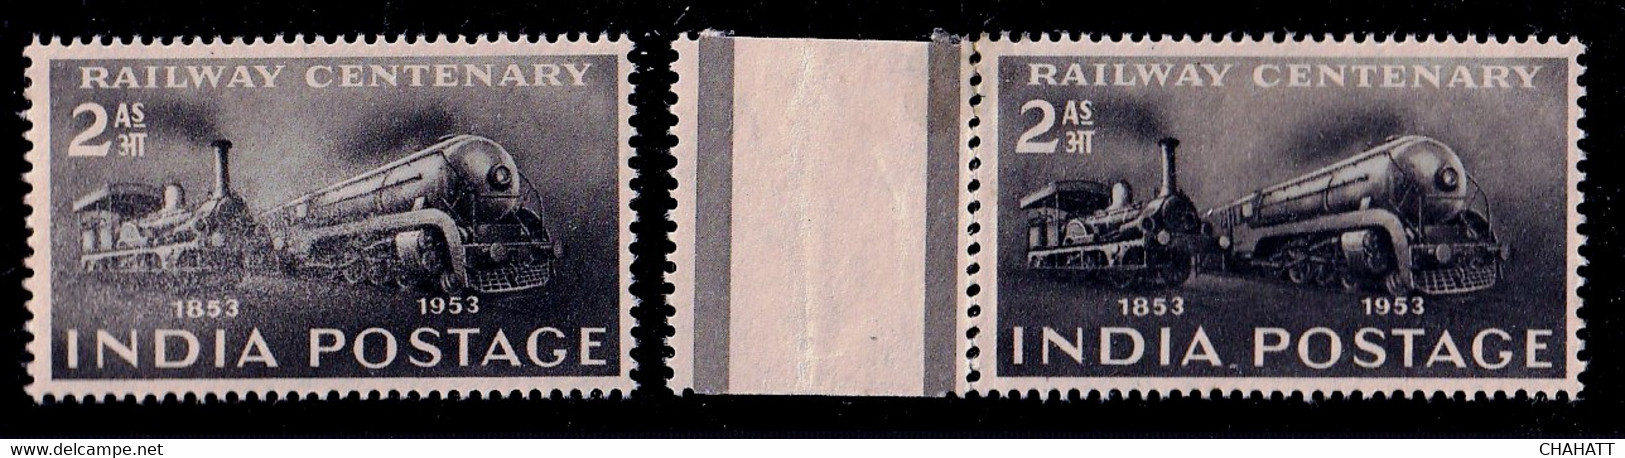 INDIA-1953- STEAM ENGINE- RAILWAYS-PRE DECIMAL- GUTTER MARGIN WITH - COLOR VARIETY-WMK- MNH-SCARCE-B9-2005 - Unused Stamps